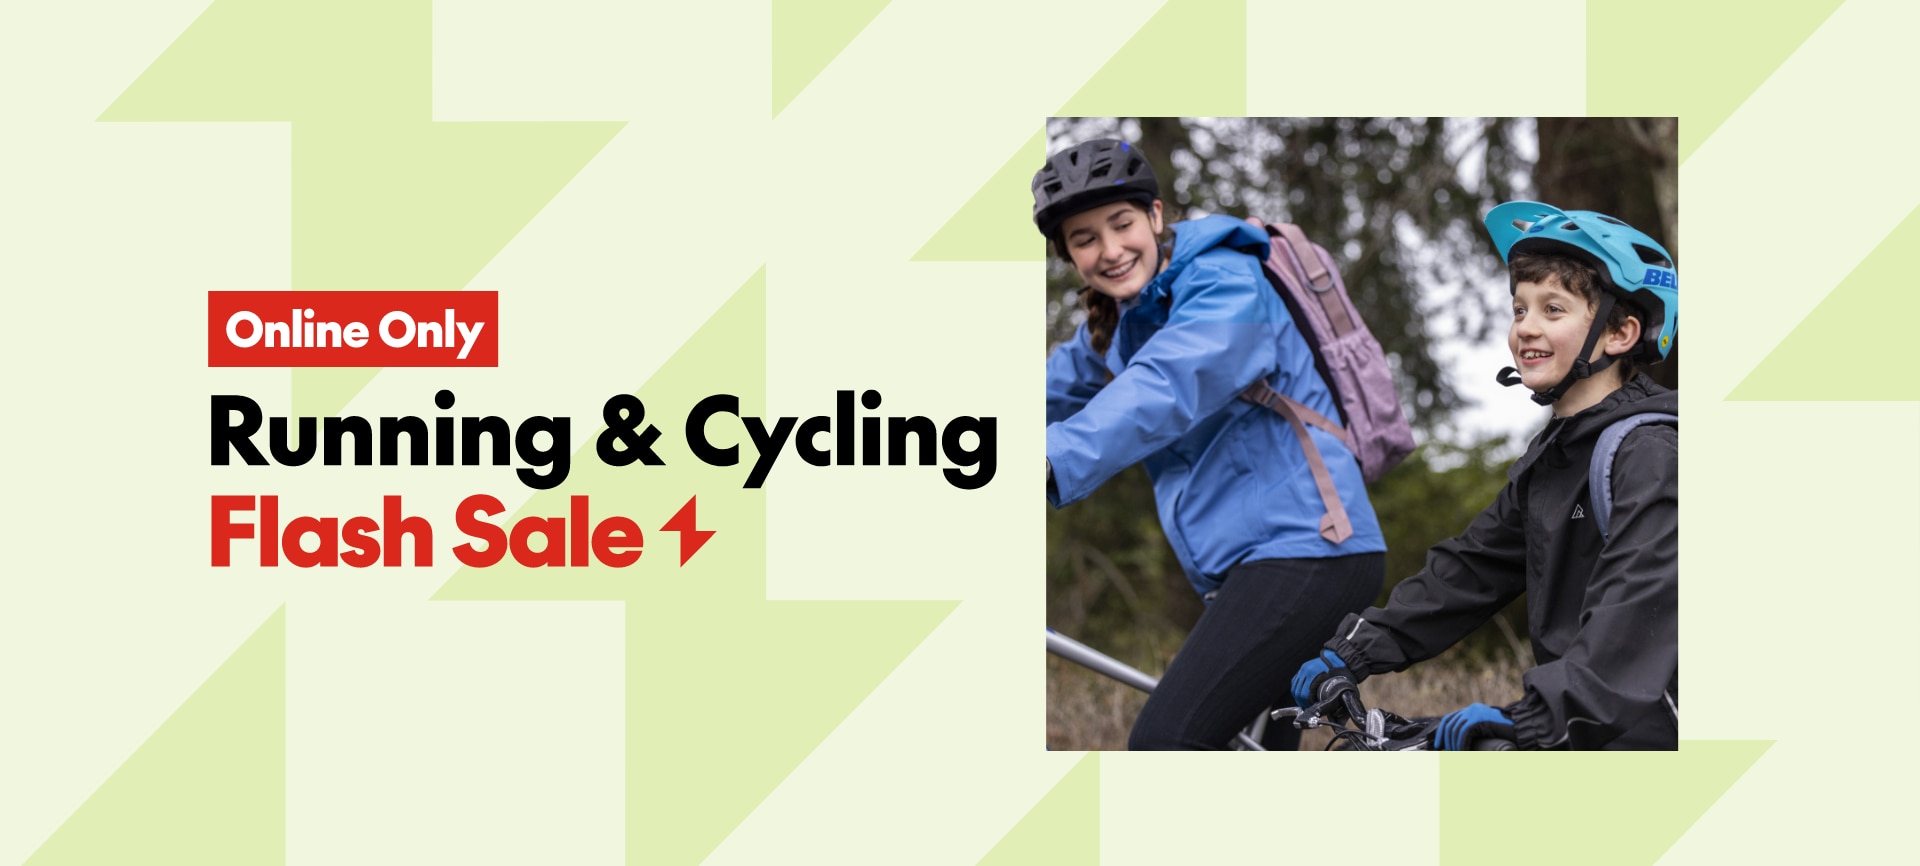 Running & Cycling Flash Sale up to 60% off*